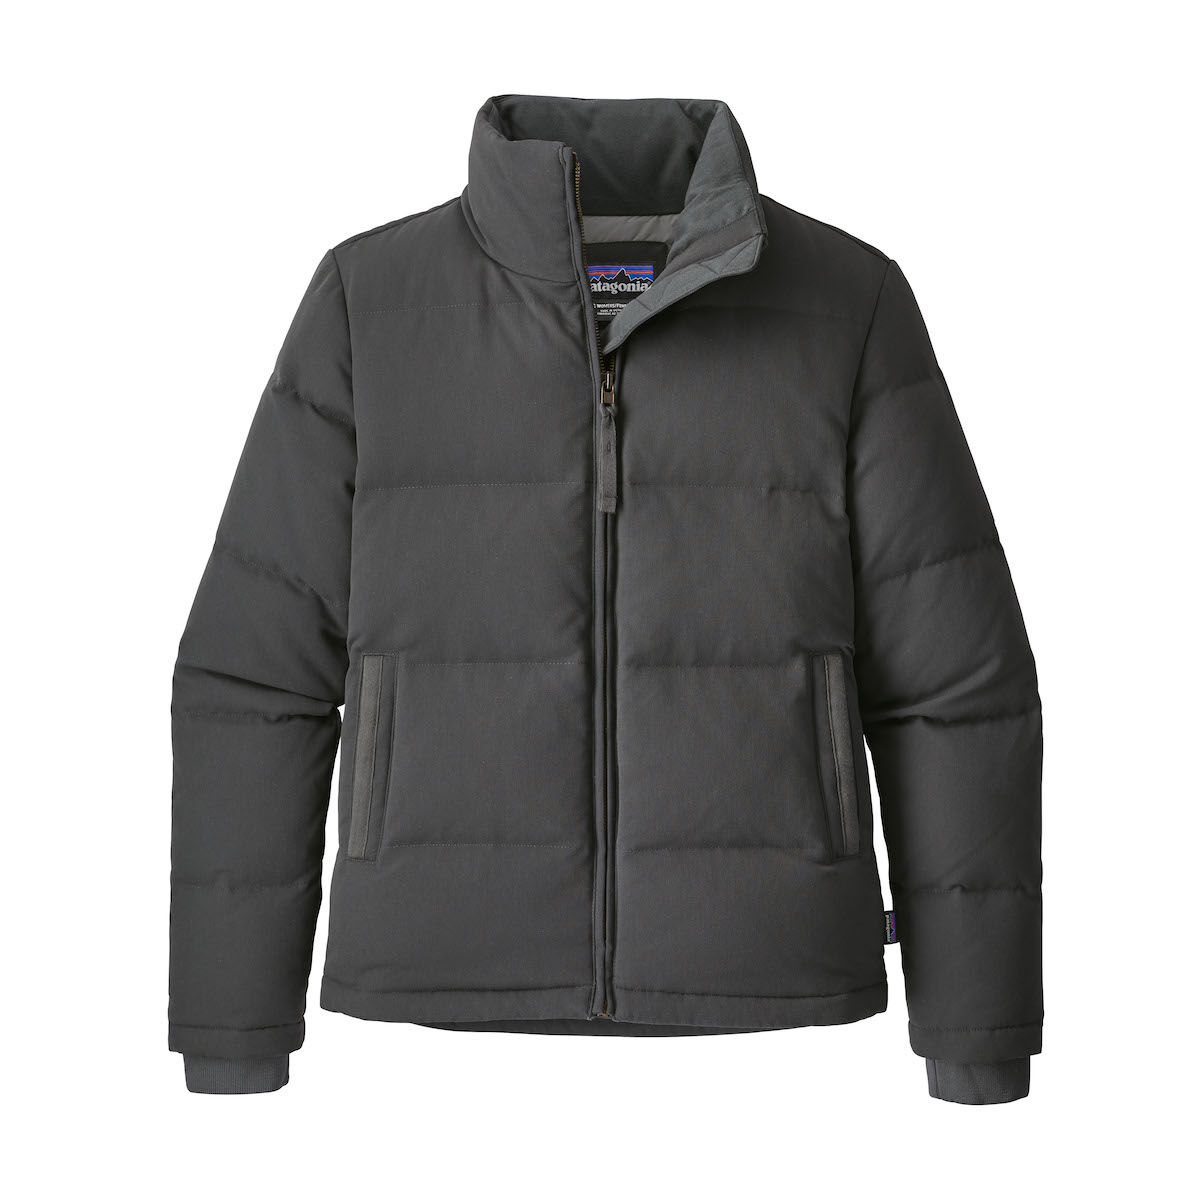 Patagonia - Bivy Jkt - Giacca invernale - Donna